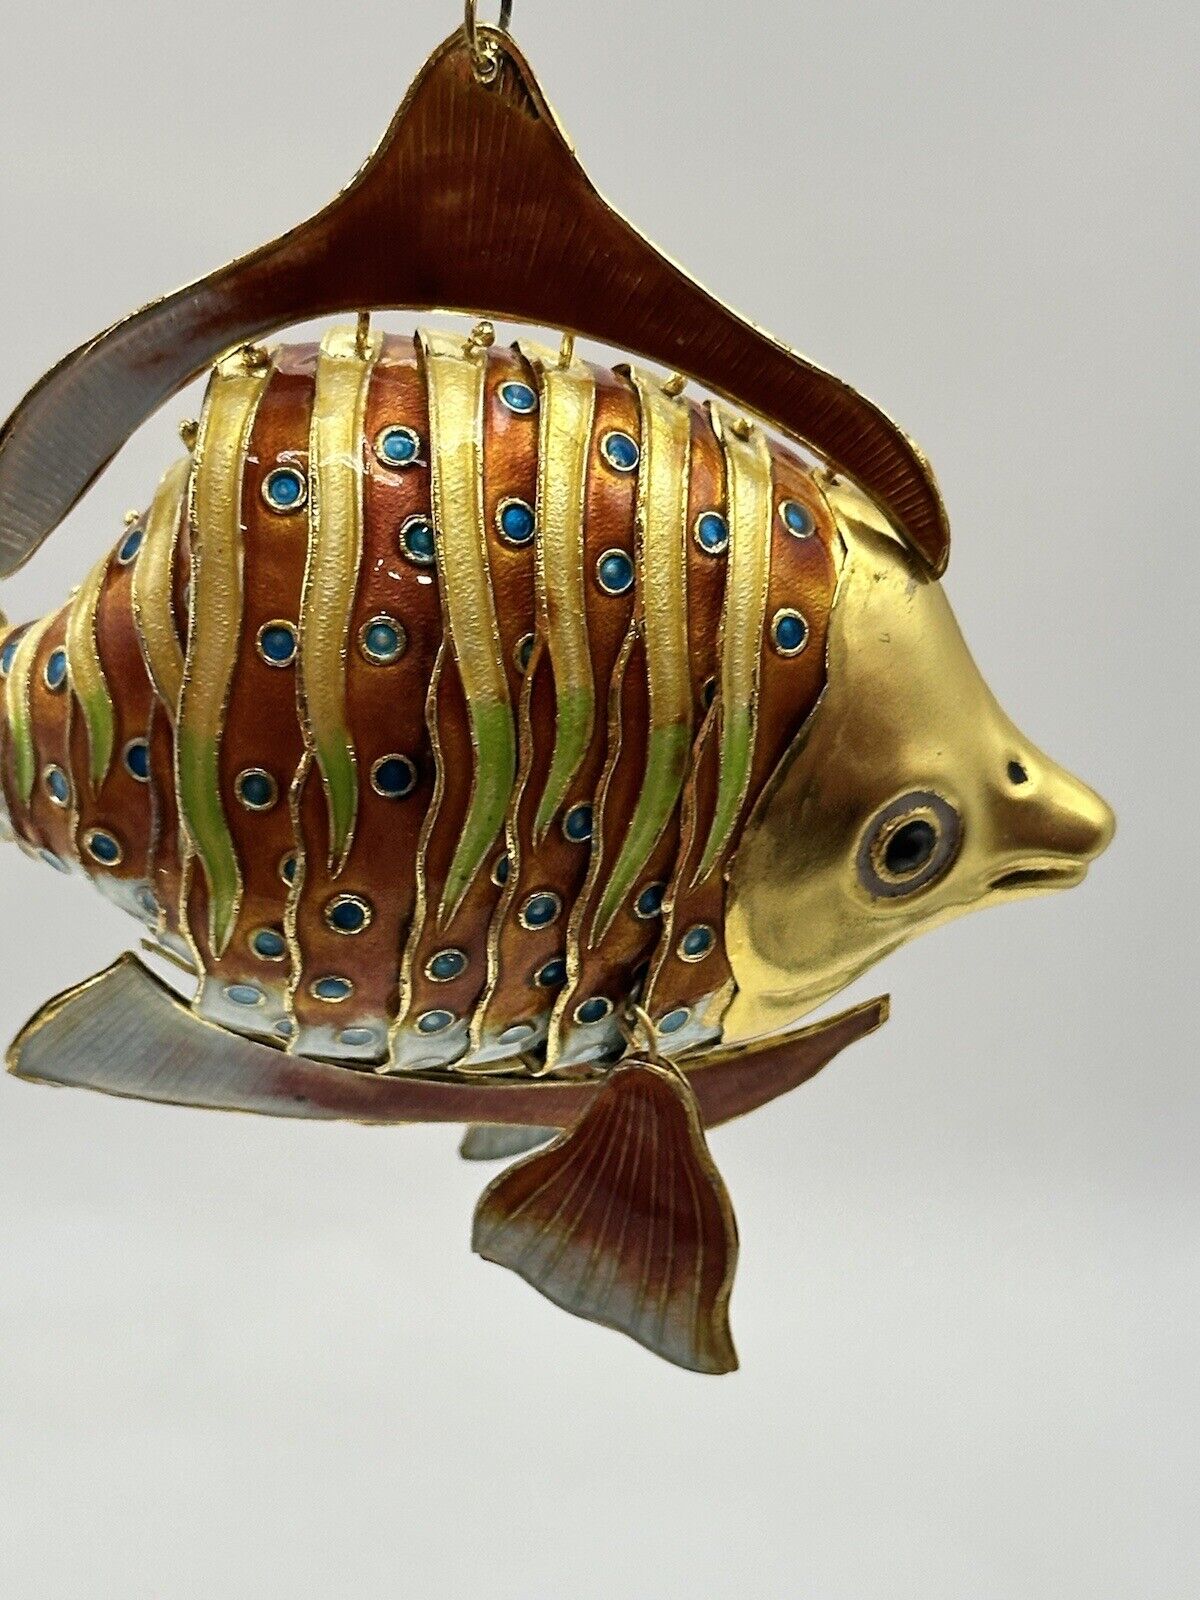 Cloisonné Enamel And Metal Articulated Fish Hanging Ornament Decoration